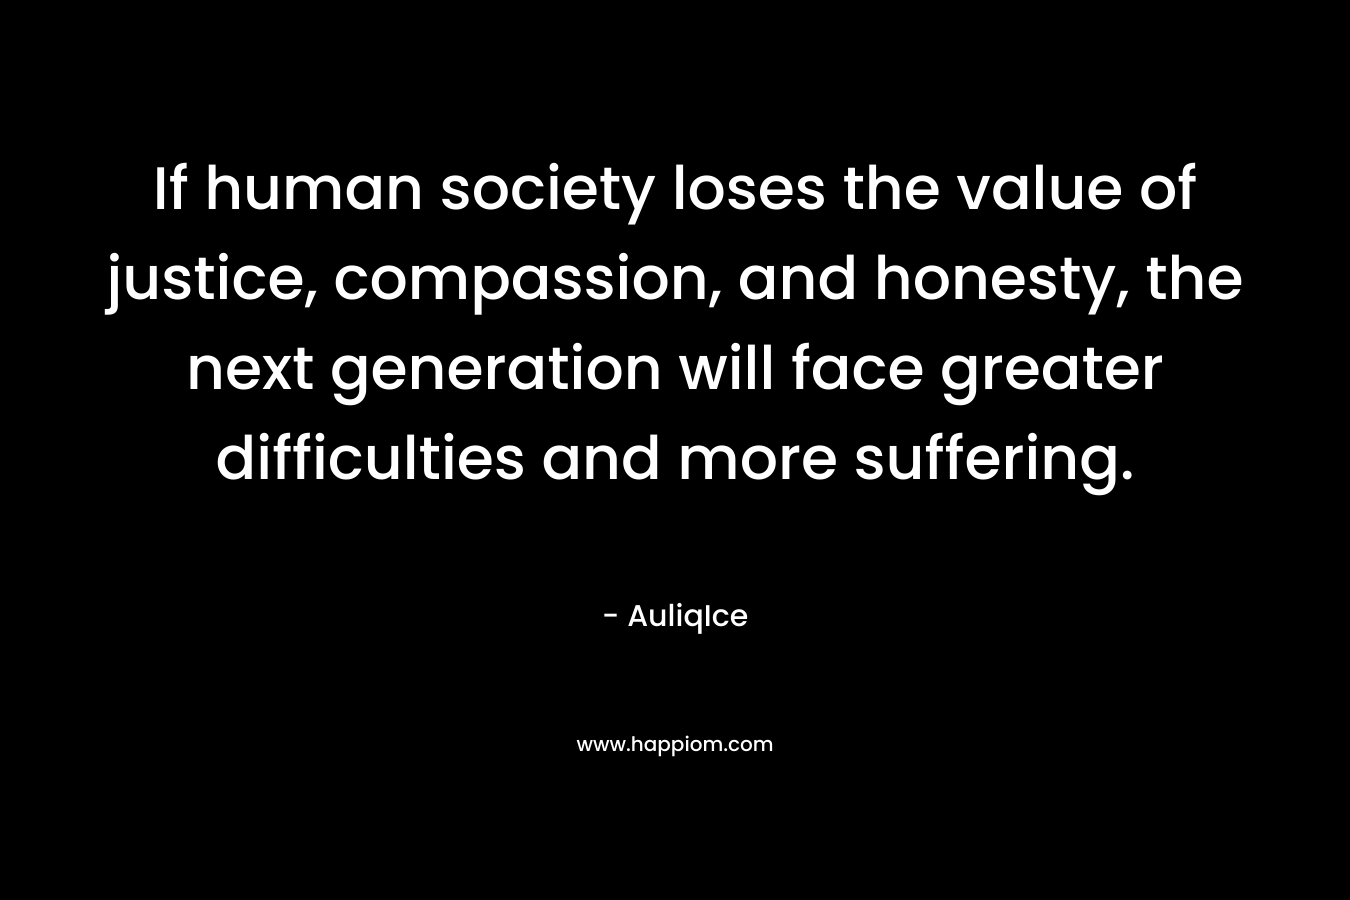 If human society loses the value of justice, compassion, and honesty, the next generation will face greater difficulties and more suffering.